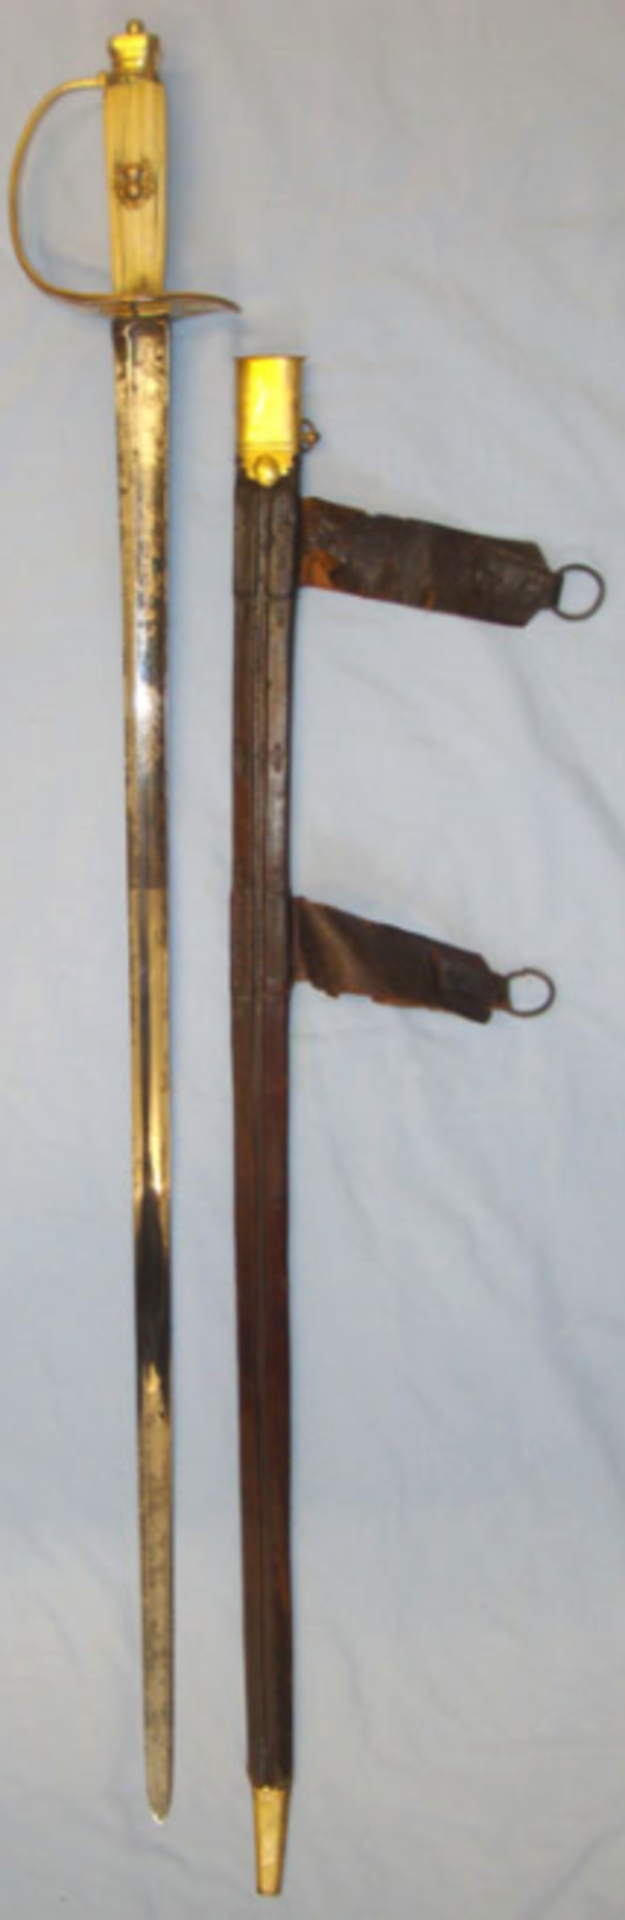 EXTREMELY RARE, Pre 1783 American War Of Independence American Infantry Officer's Sword With Antique